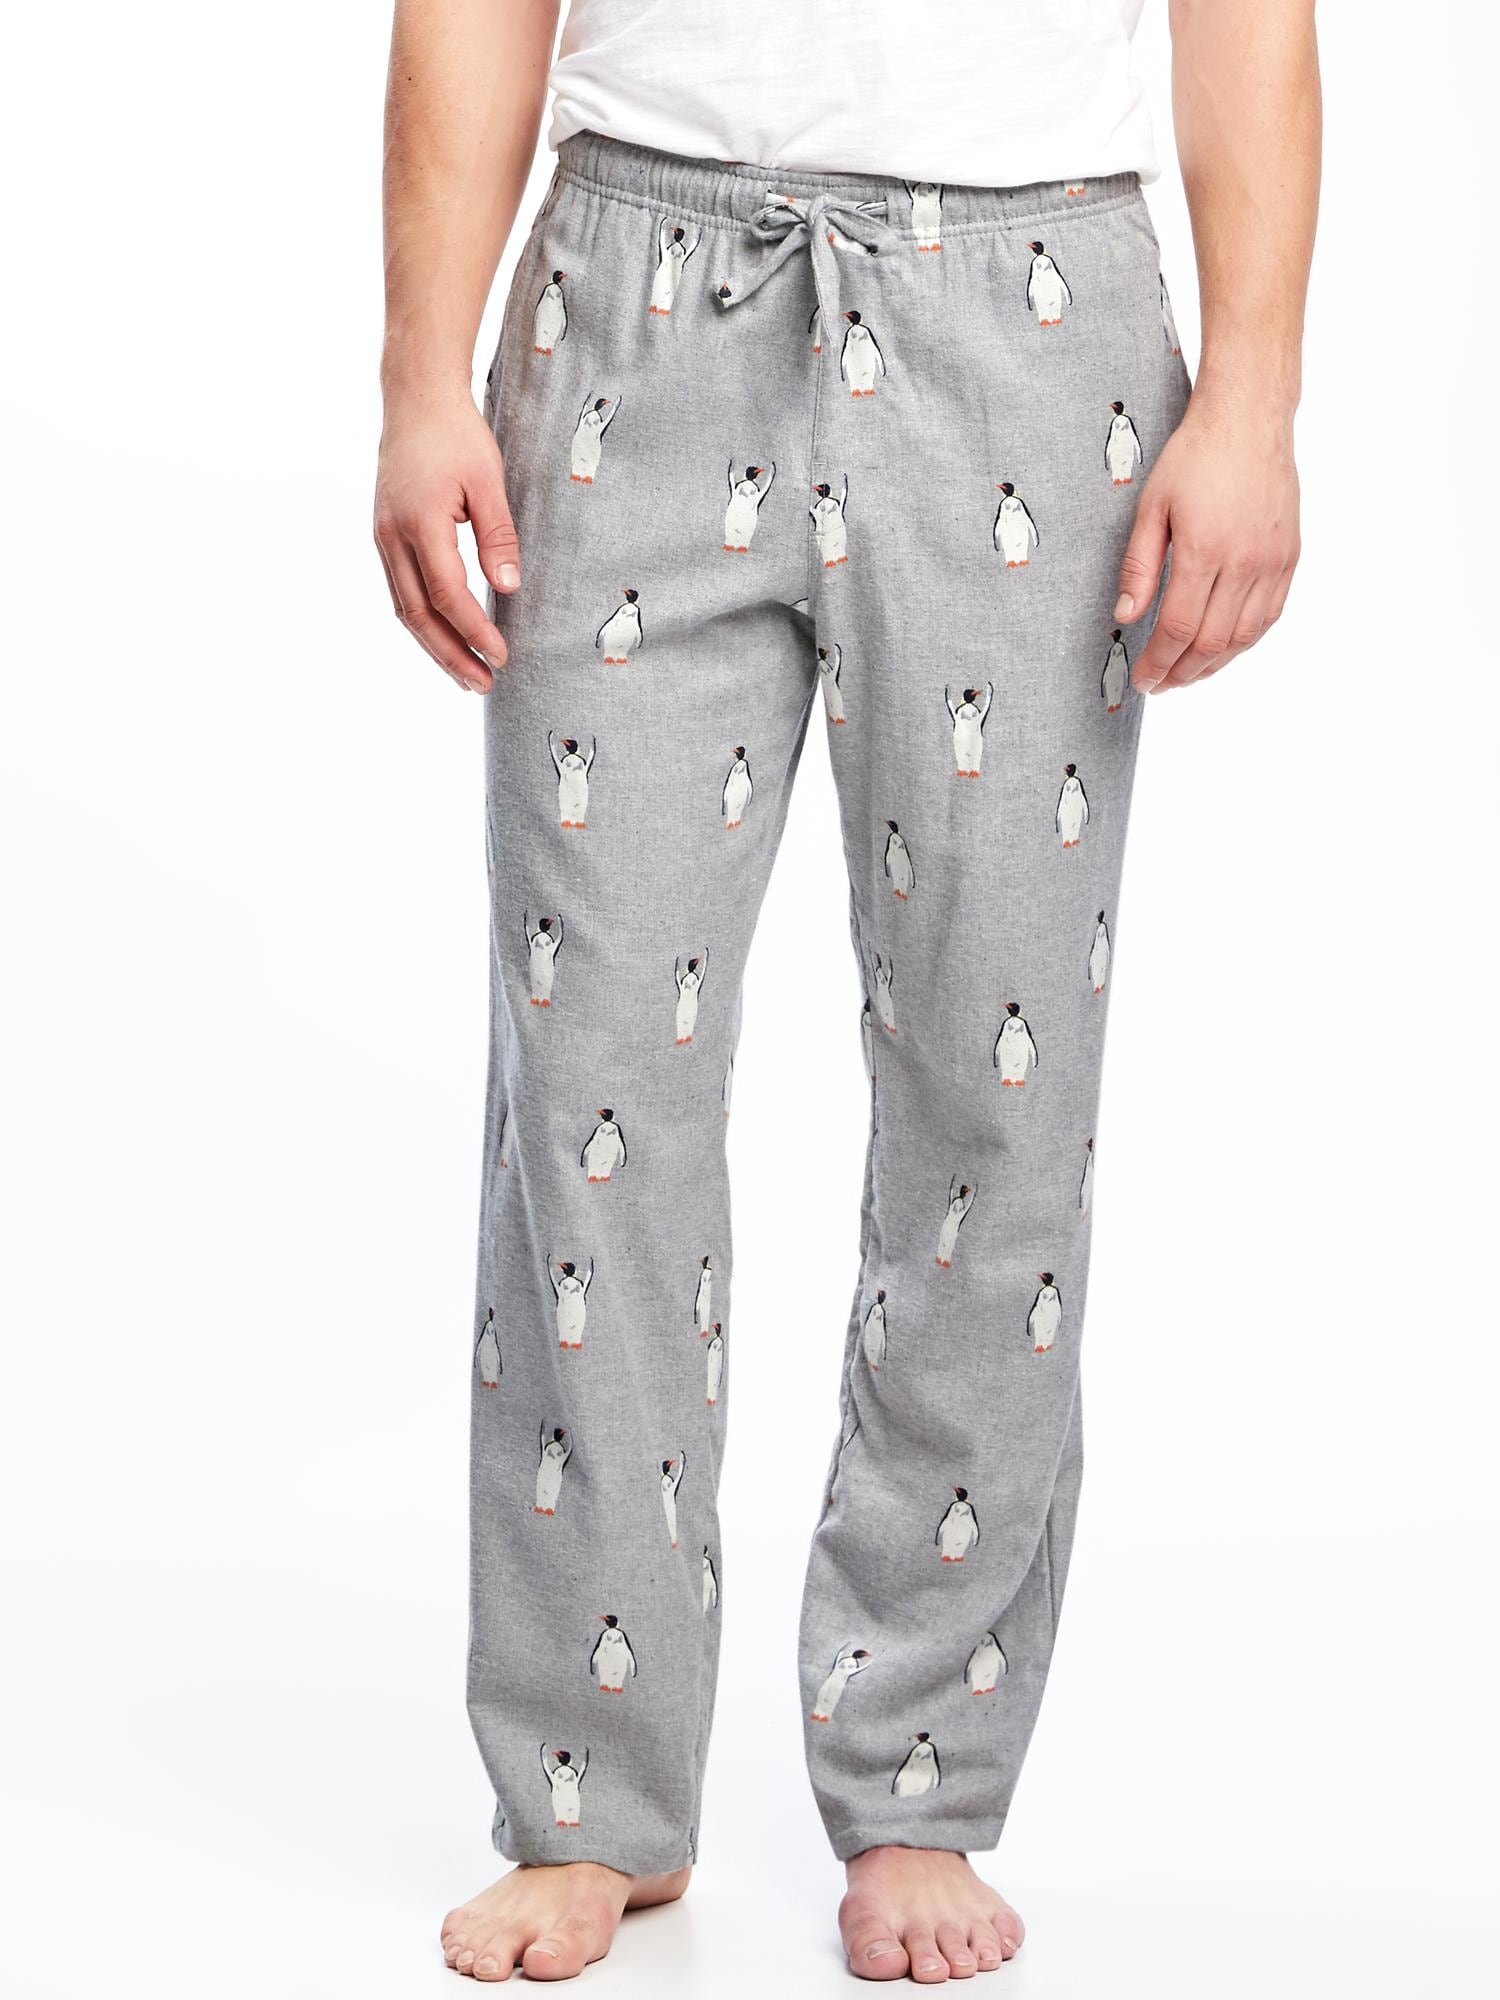 View large product image 1 of 1. Patterned Flannel Sleep Pants for Men